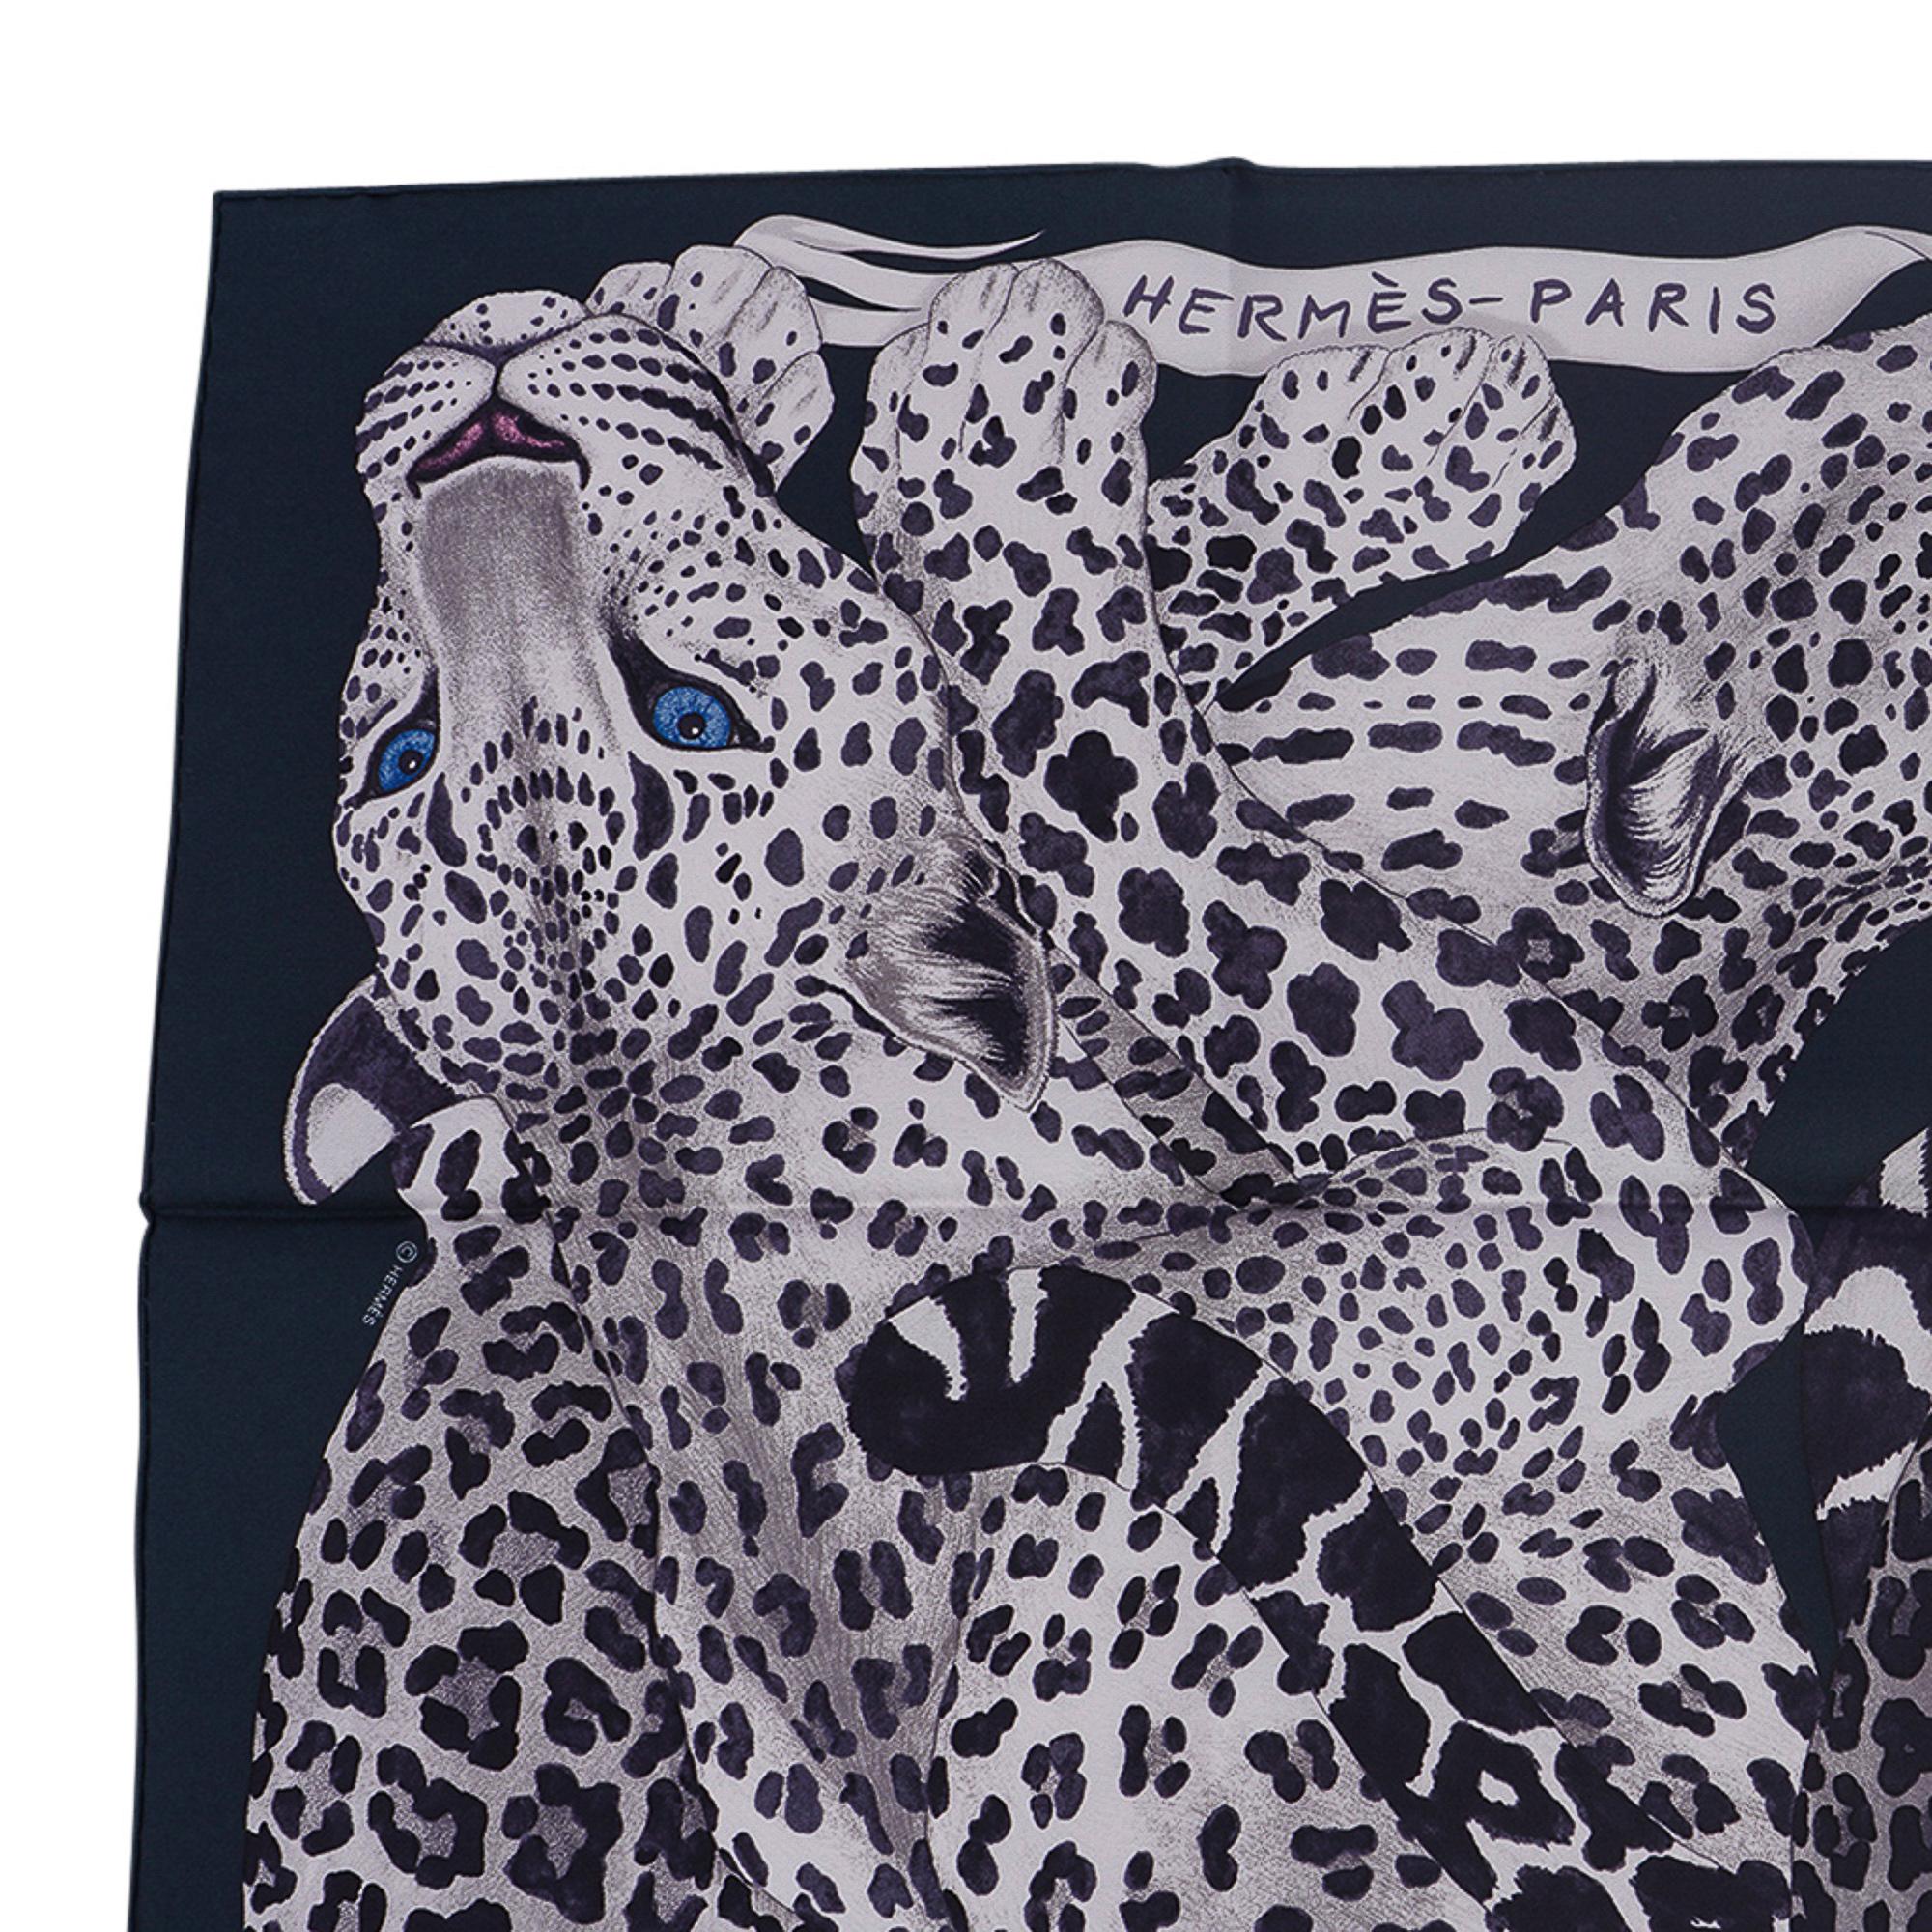 Mightychic offers a guaranteed authentic Hermes Lazy Leopardesses silk scarf featured in Vert Noir and Gris.
This exquisite Hermes scarf depicts the graceful majesty of felines in rest.
Designed by Arlette Ess.
Signature hand rolled edge.
Comes with